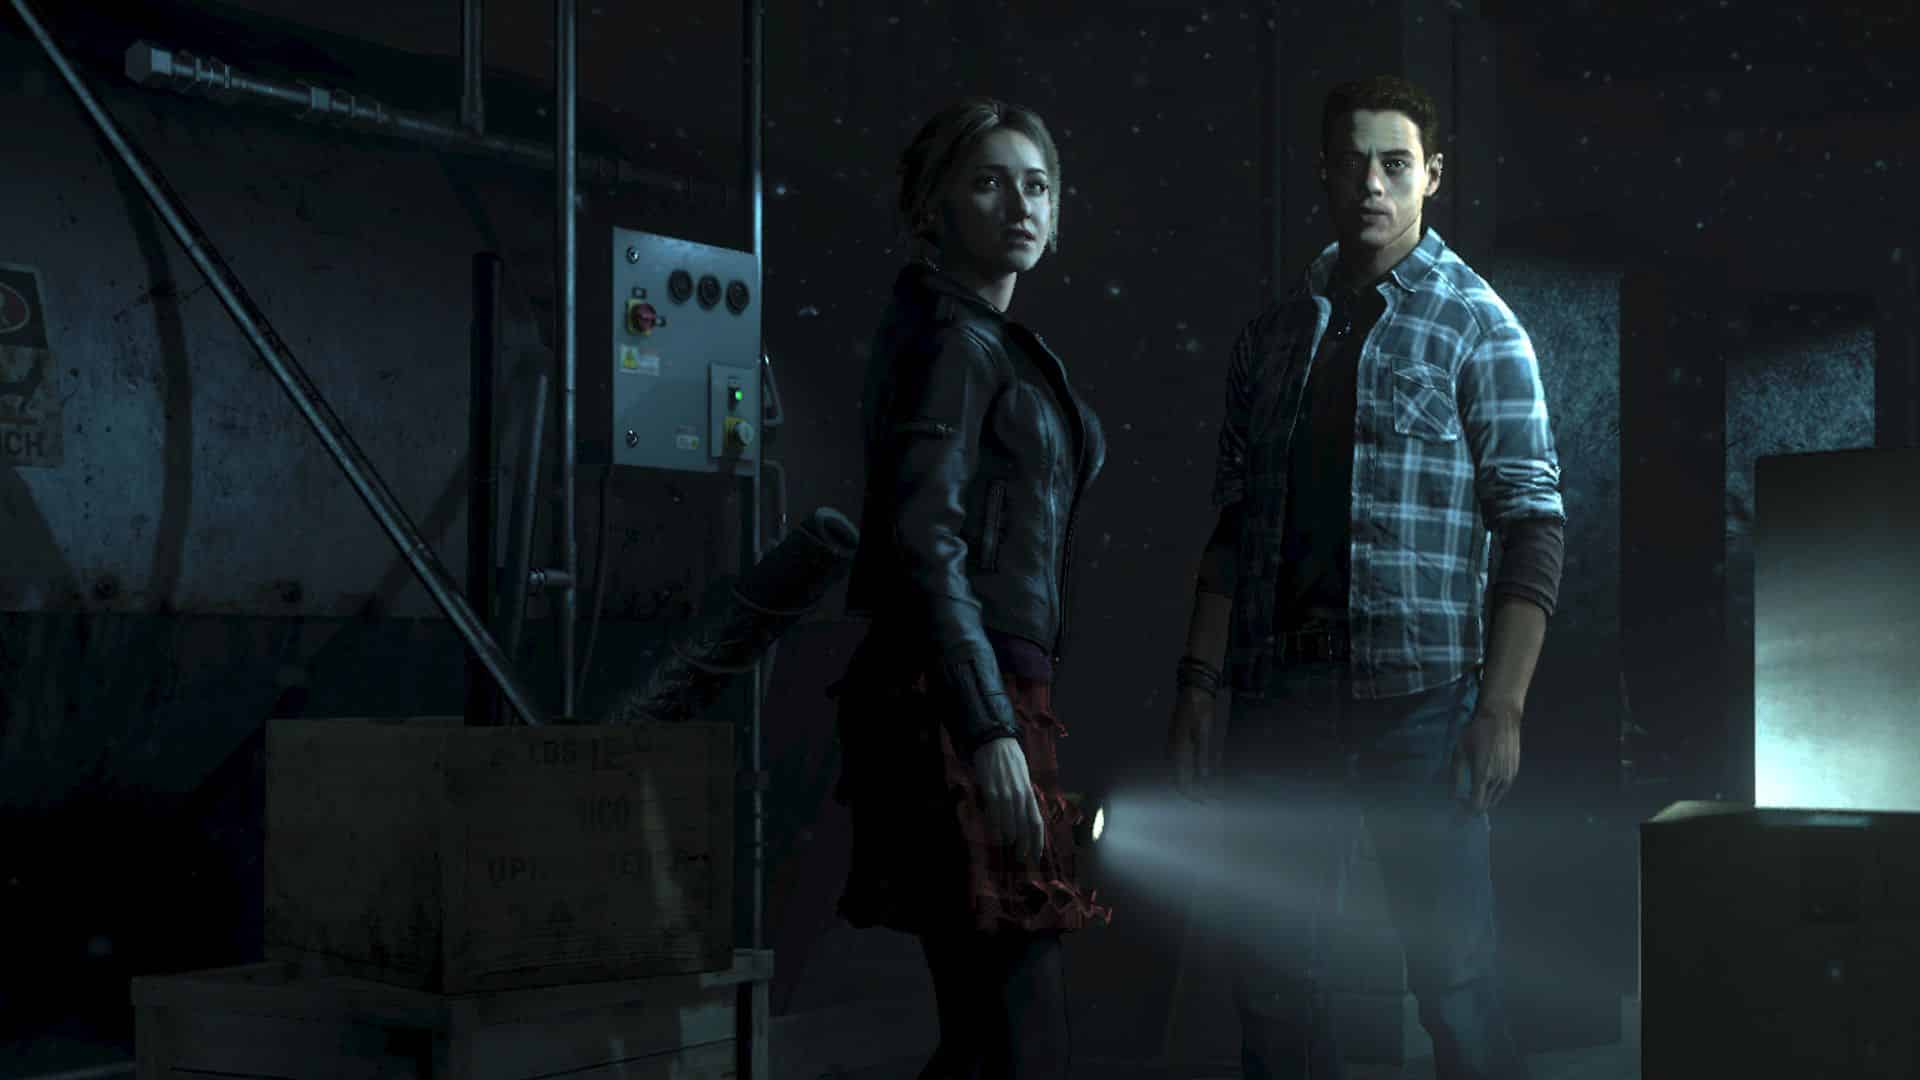 josh and sam standing together in until dawn